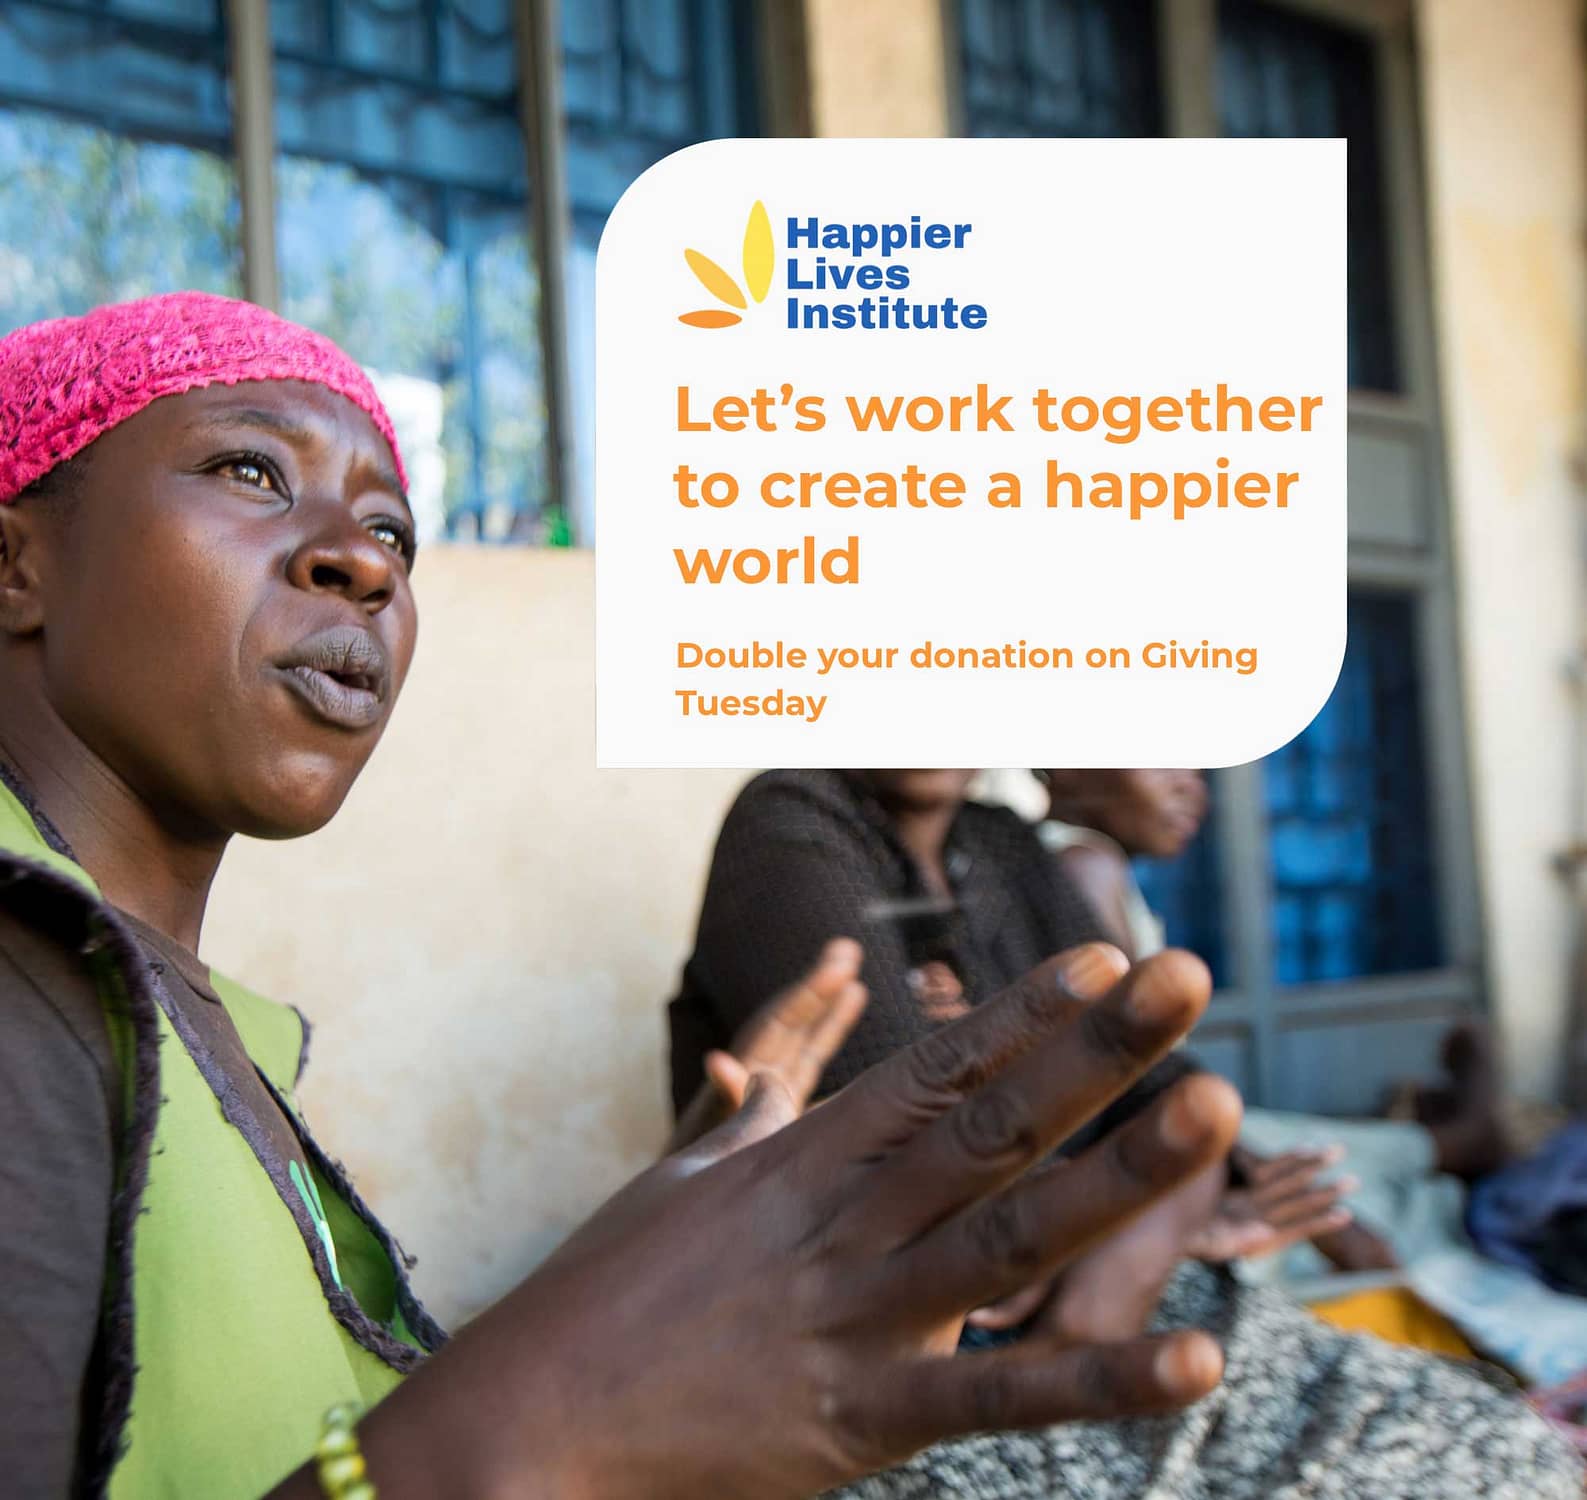 Let's work together to create a happier world